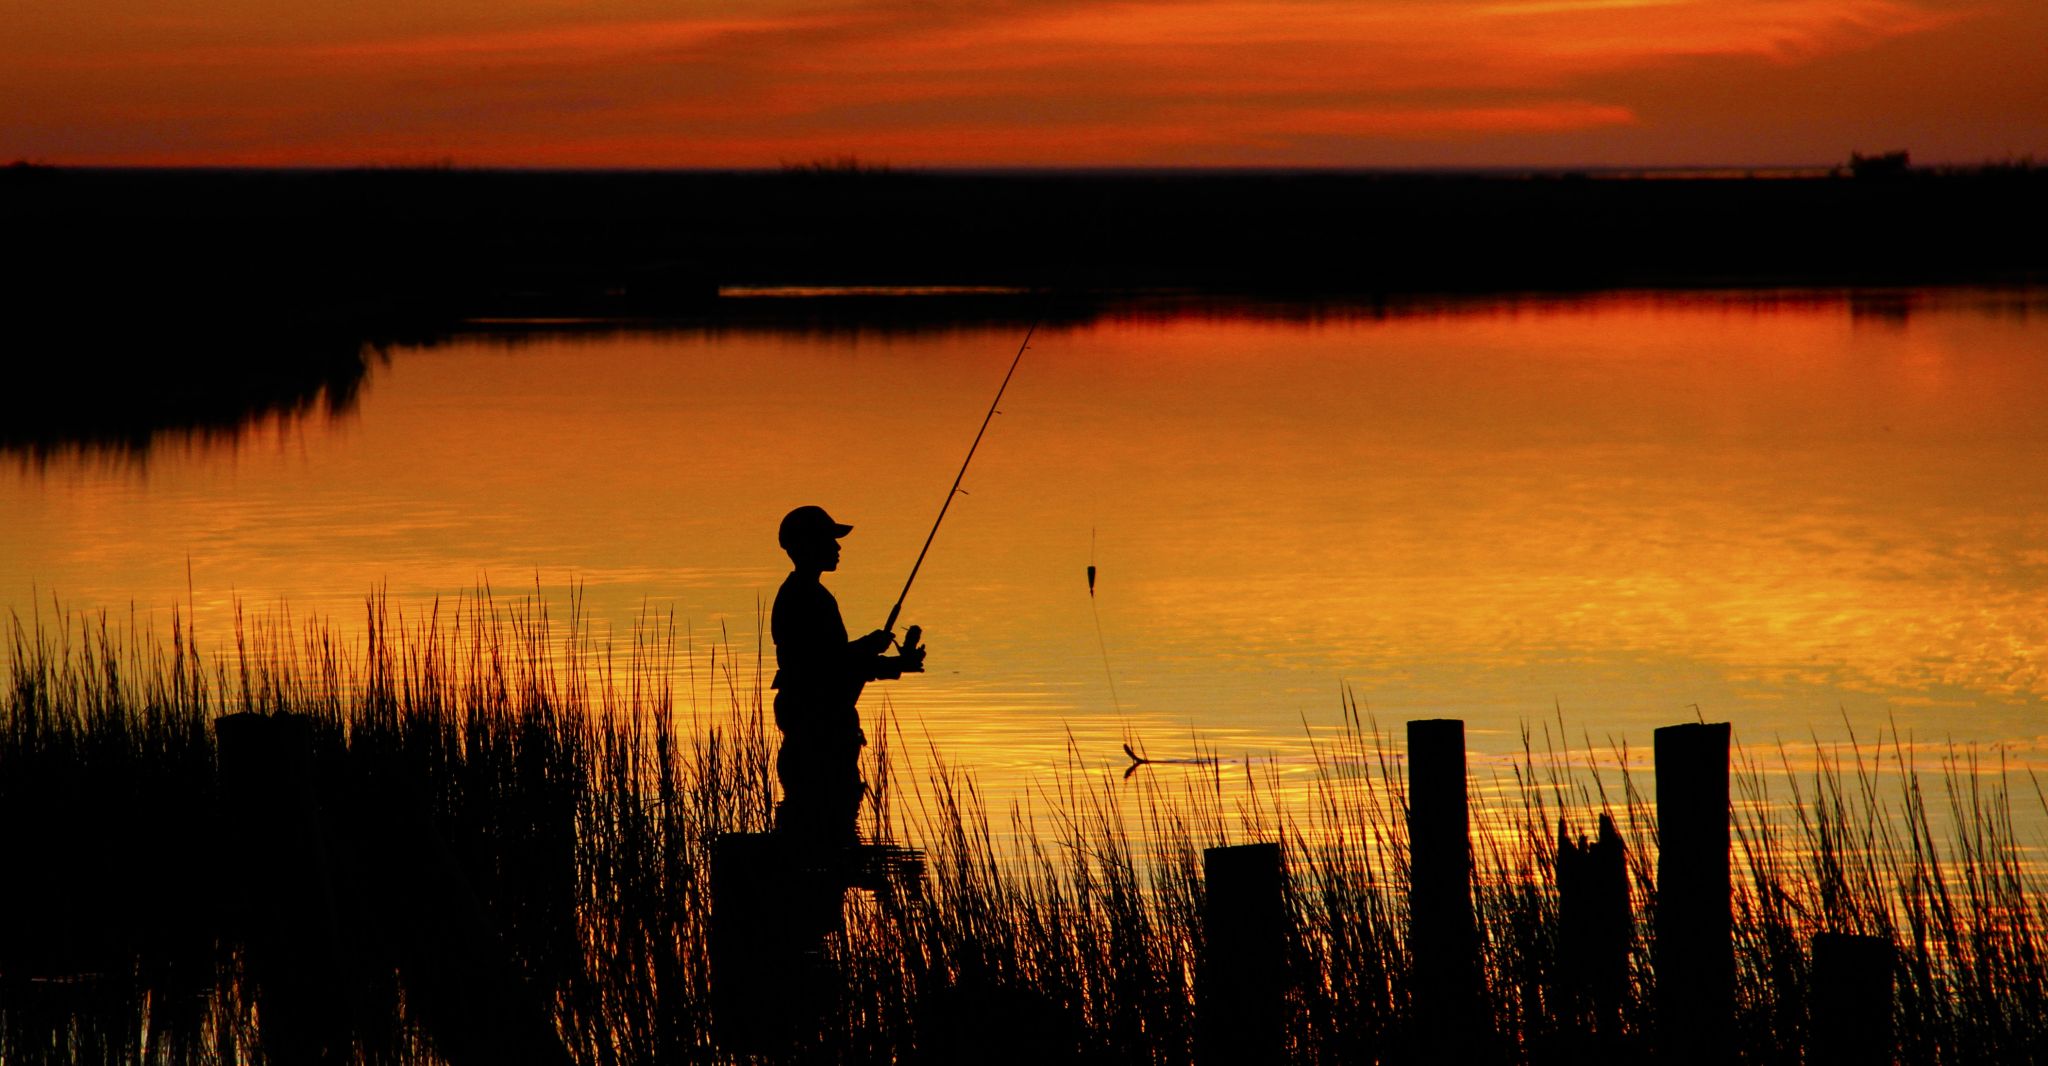 Coronavirus and the outdoors: Hunting, fishing and a tether to normalcy